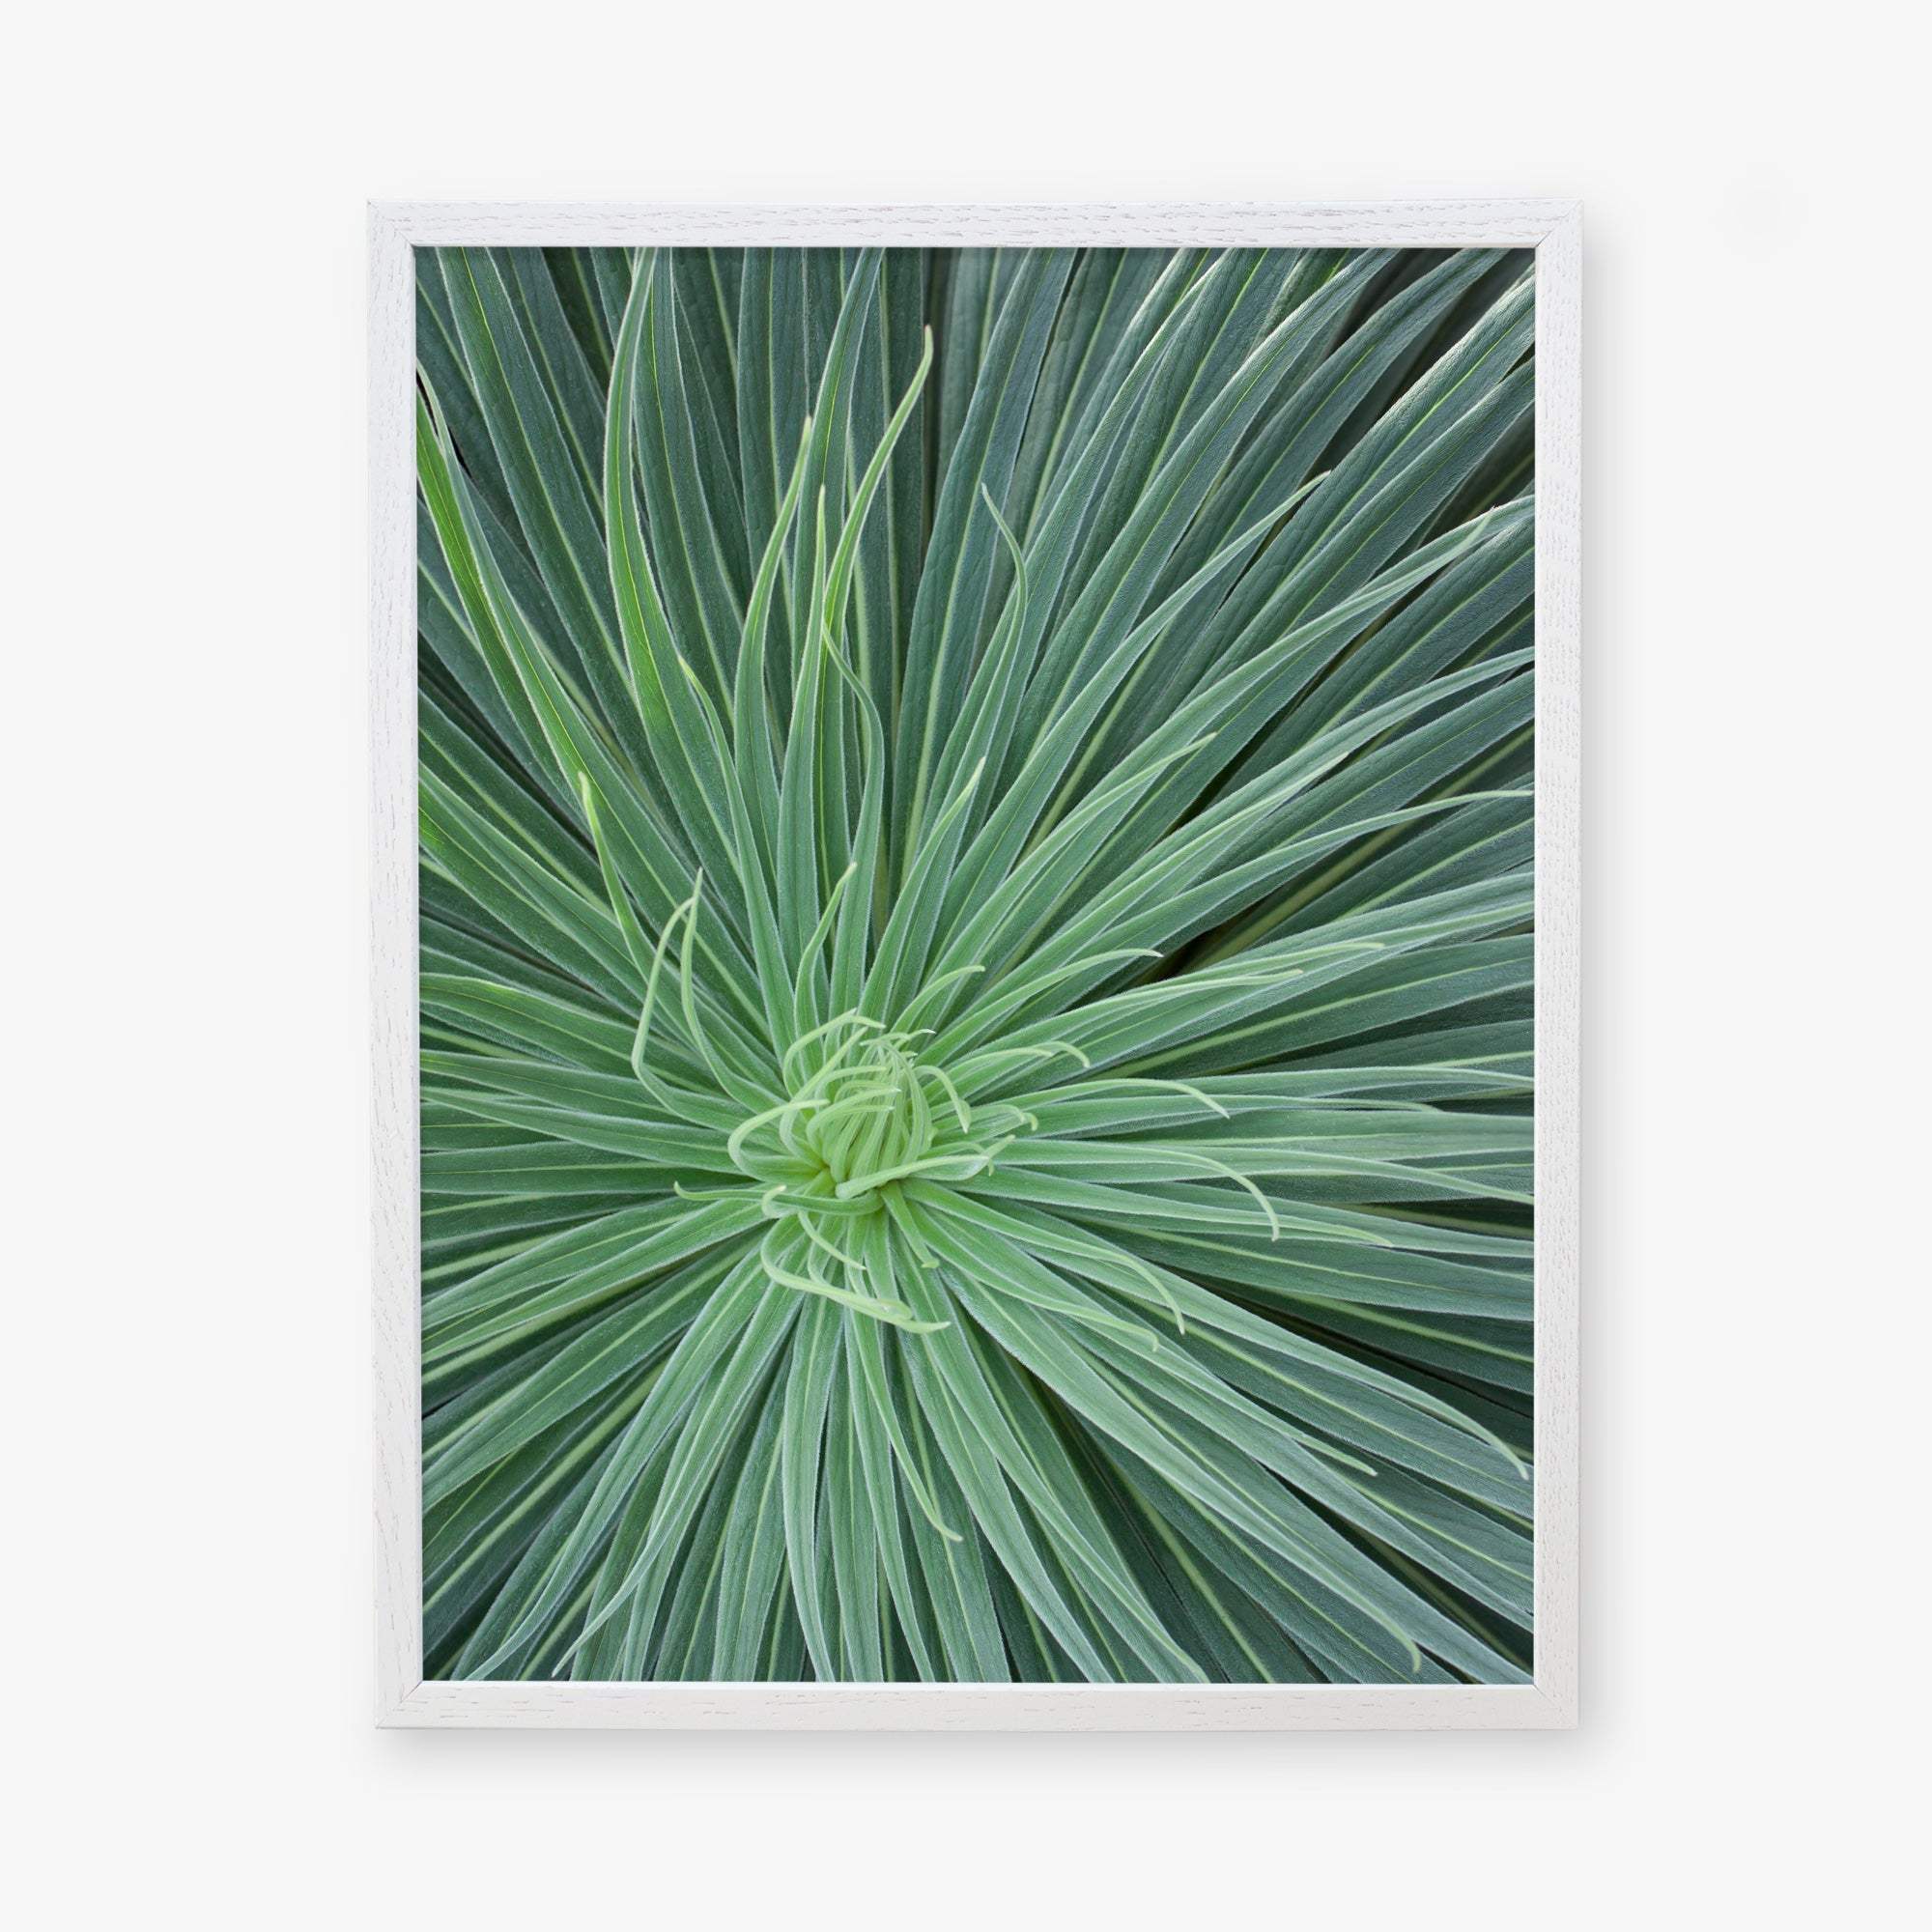 Top view of a green spiky desert plant with thin long leaves radiating from the center, framed against a white background. It looks like the Green Botanical Wall Art &#39;Desert Fireworks II&#39; from Offley Green.